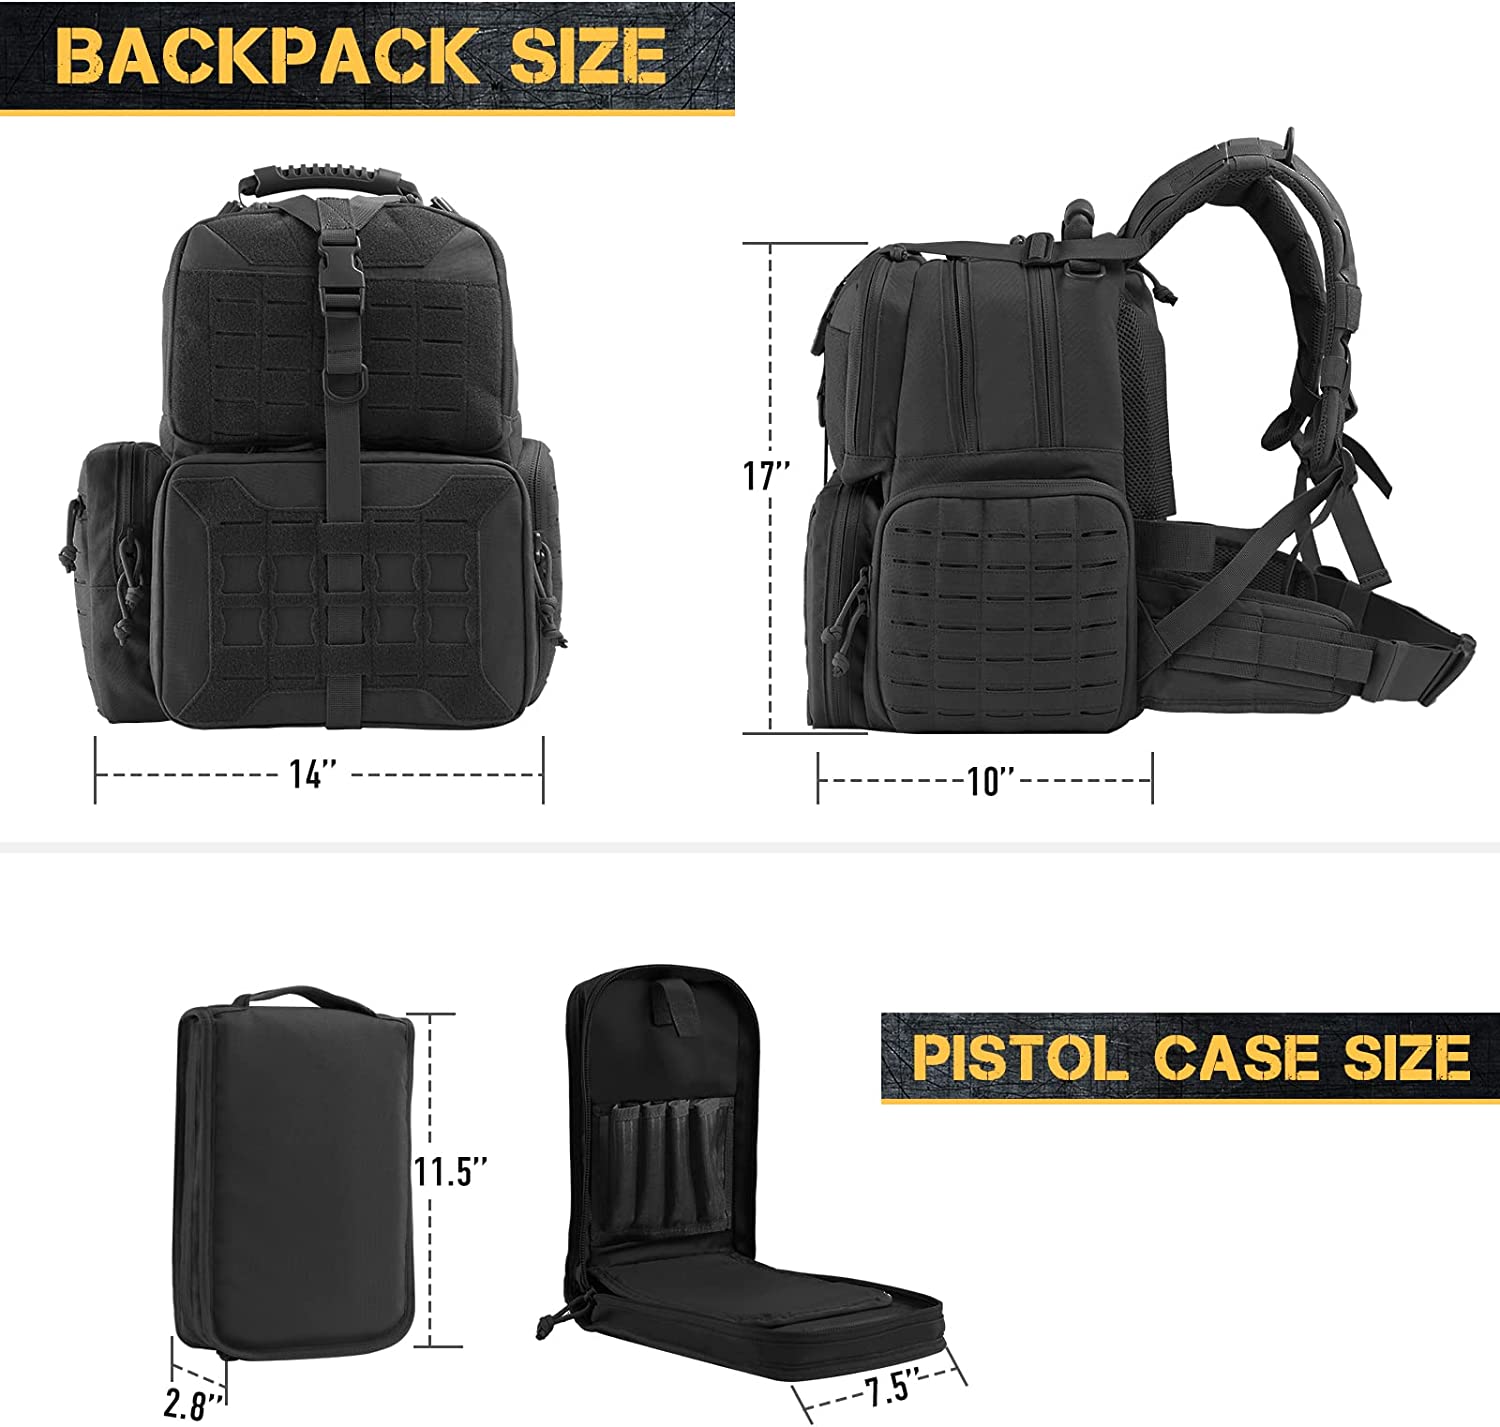 Tactical Range Backpack Bag, VOTAGOO Range Activity Bag For Handguns And Ammo, 3 Pistol Carrying Case For Hunting Shooting